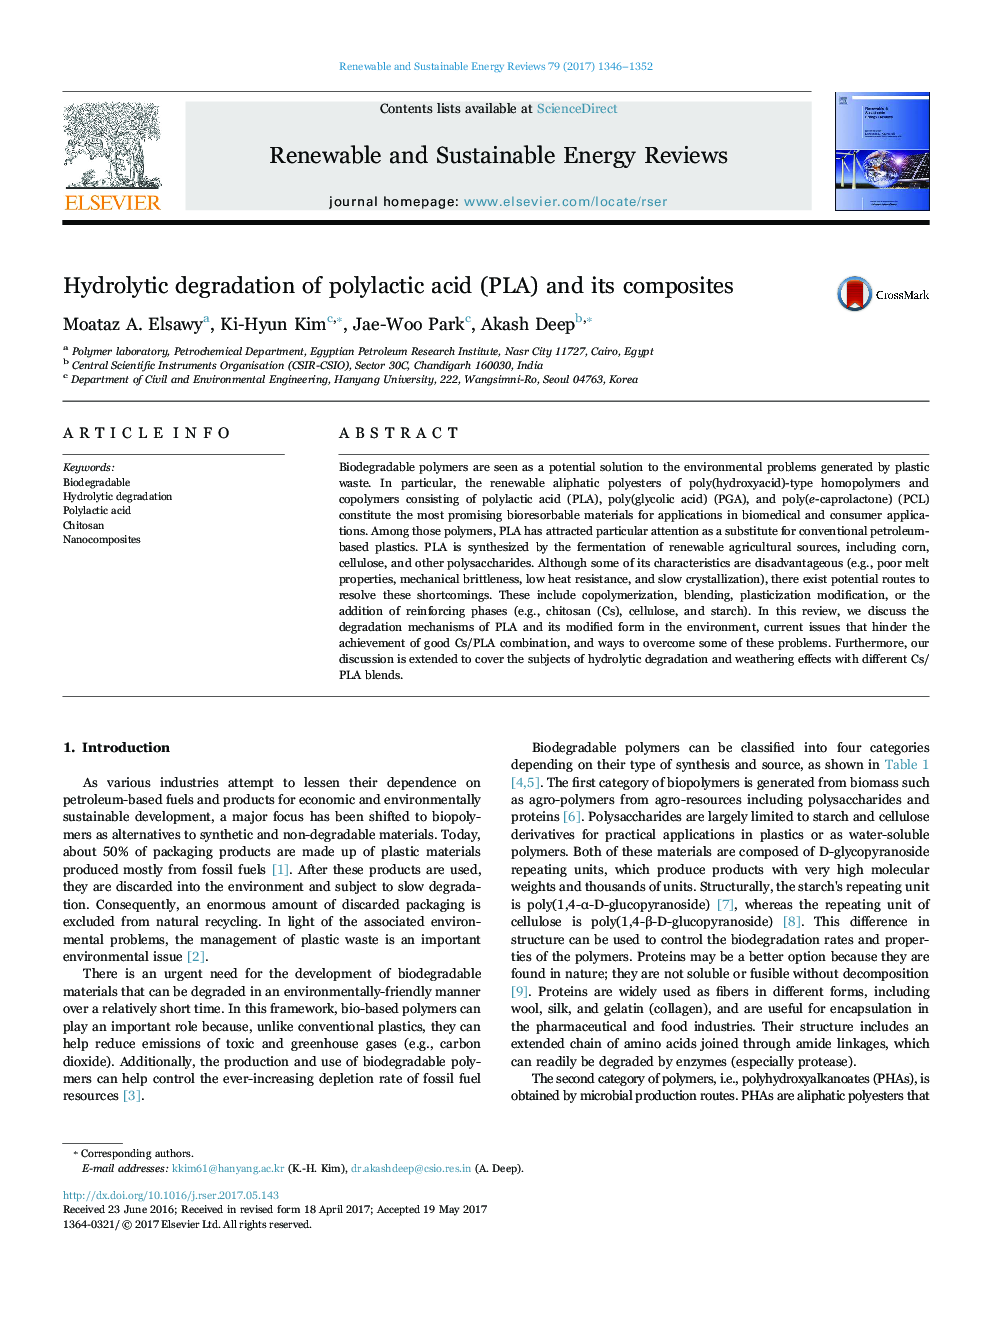 Hydrolytic degradation of polylactic acid (PLA) and its composites